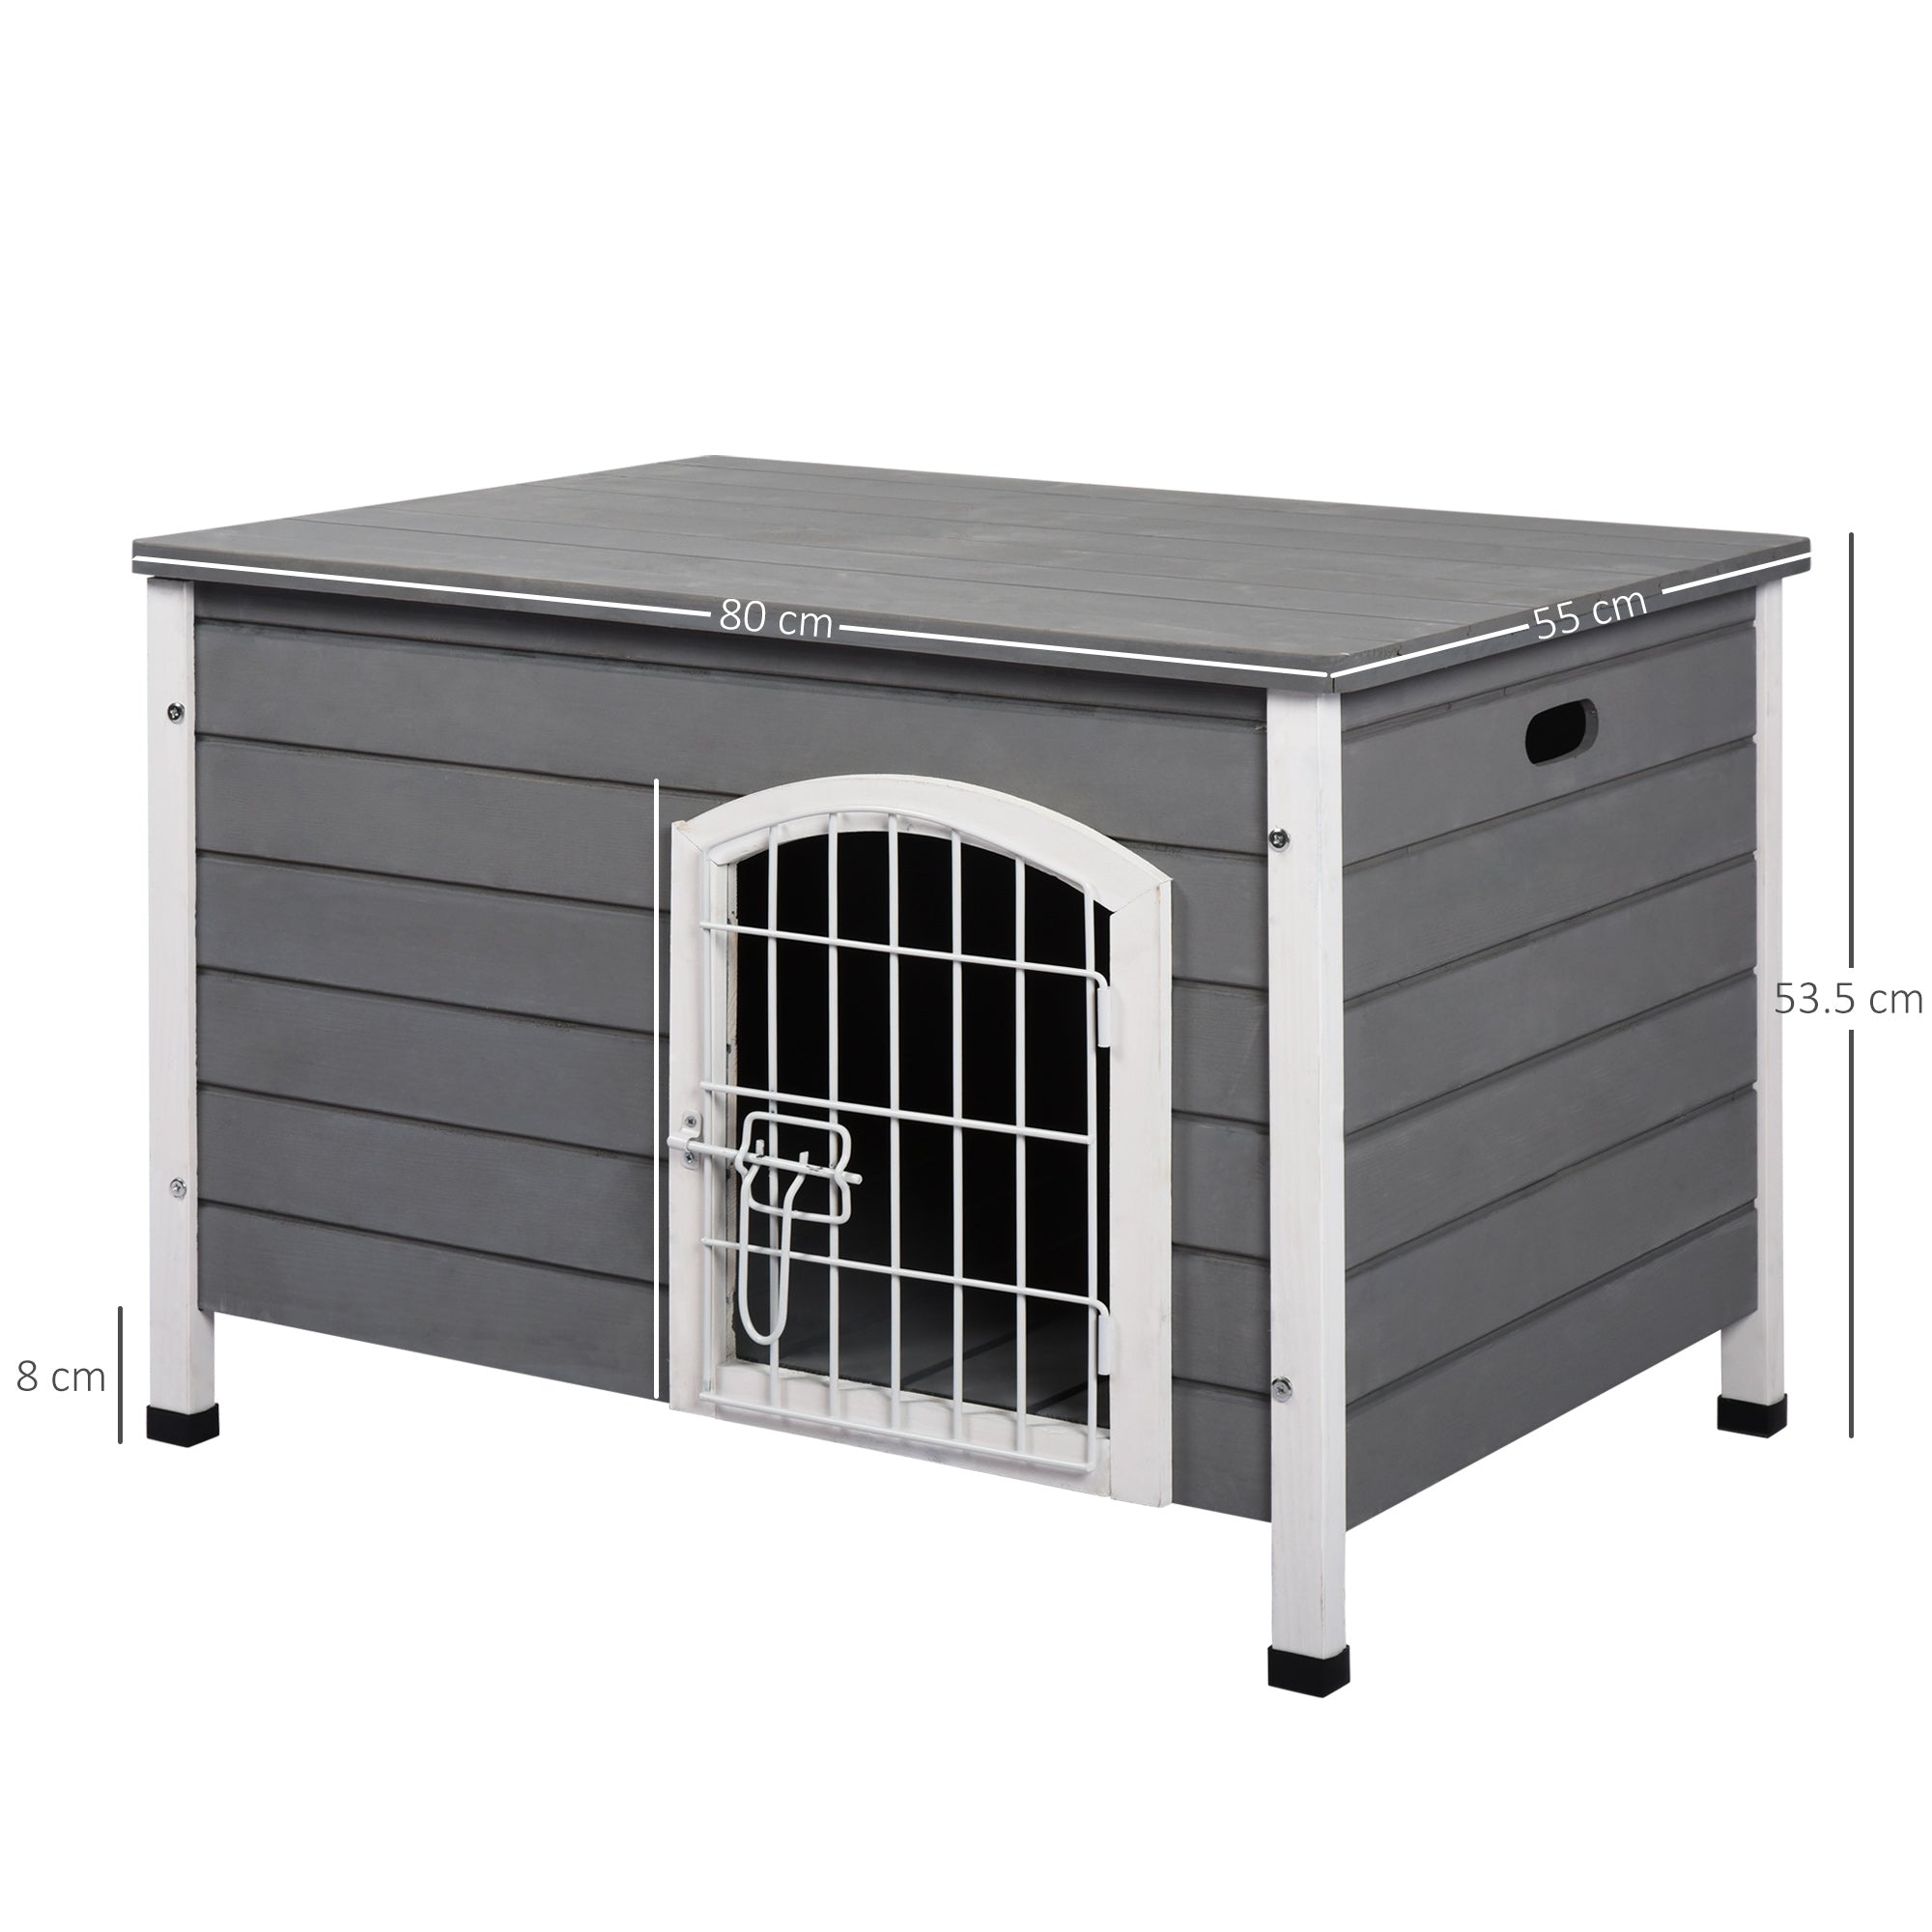 Wooden Dog Crate Kennel Lockable Door Small Animal House w/ Openable Top Gray